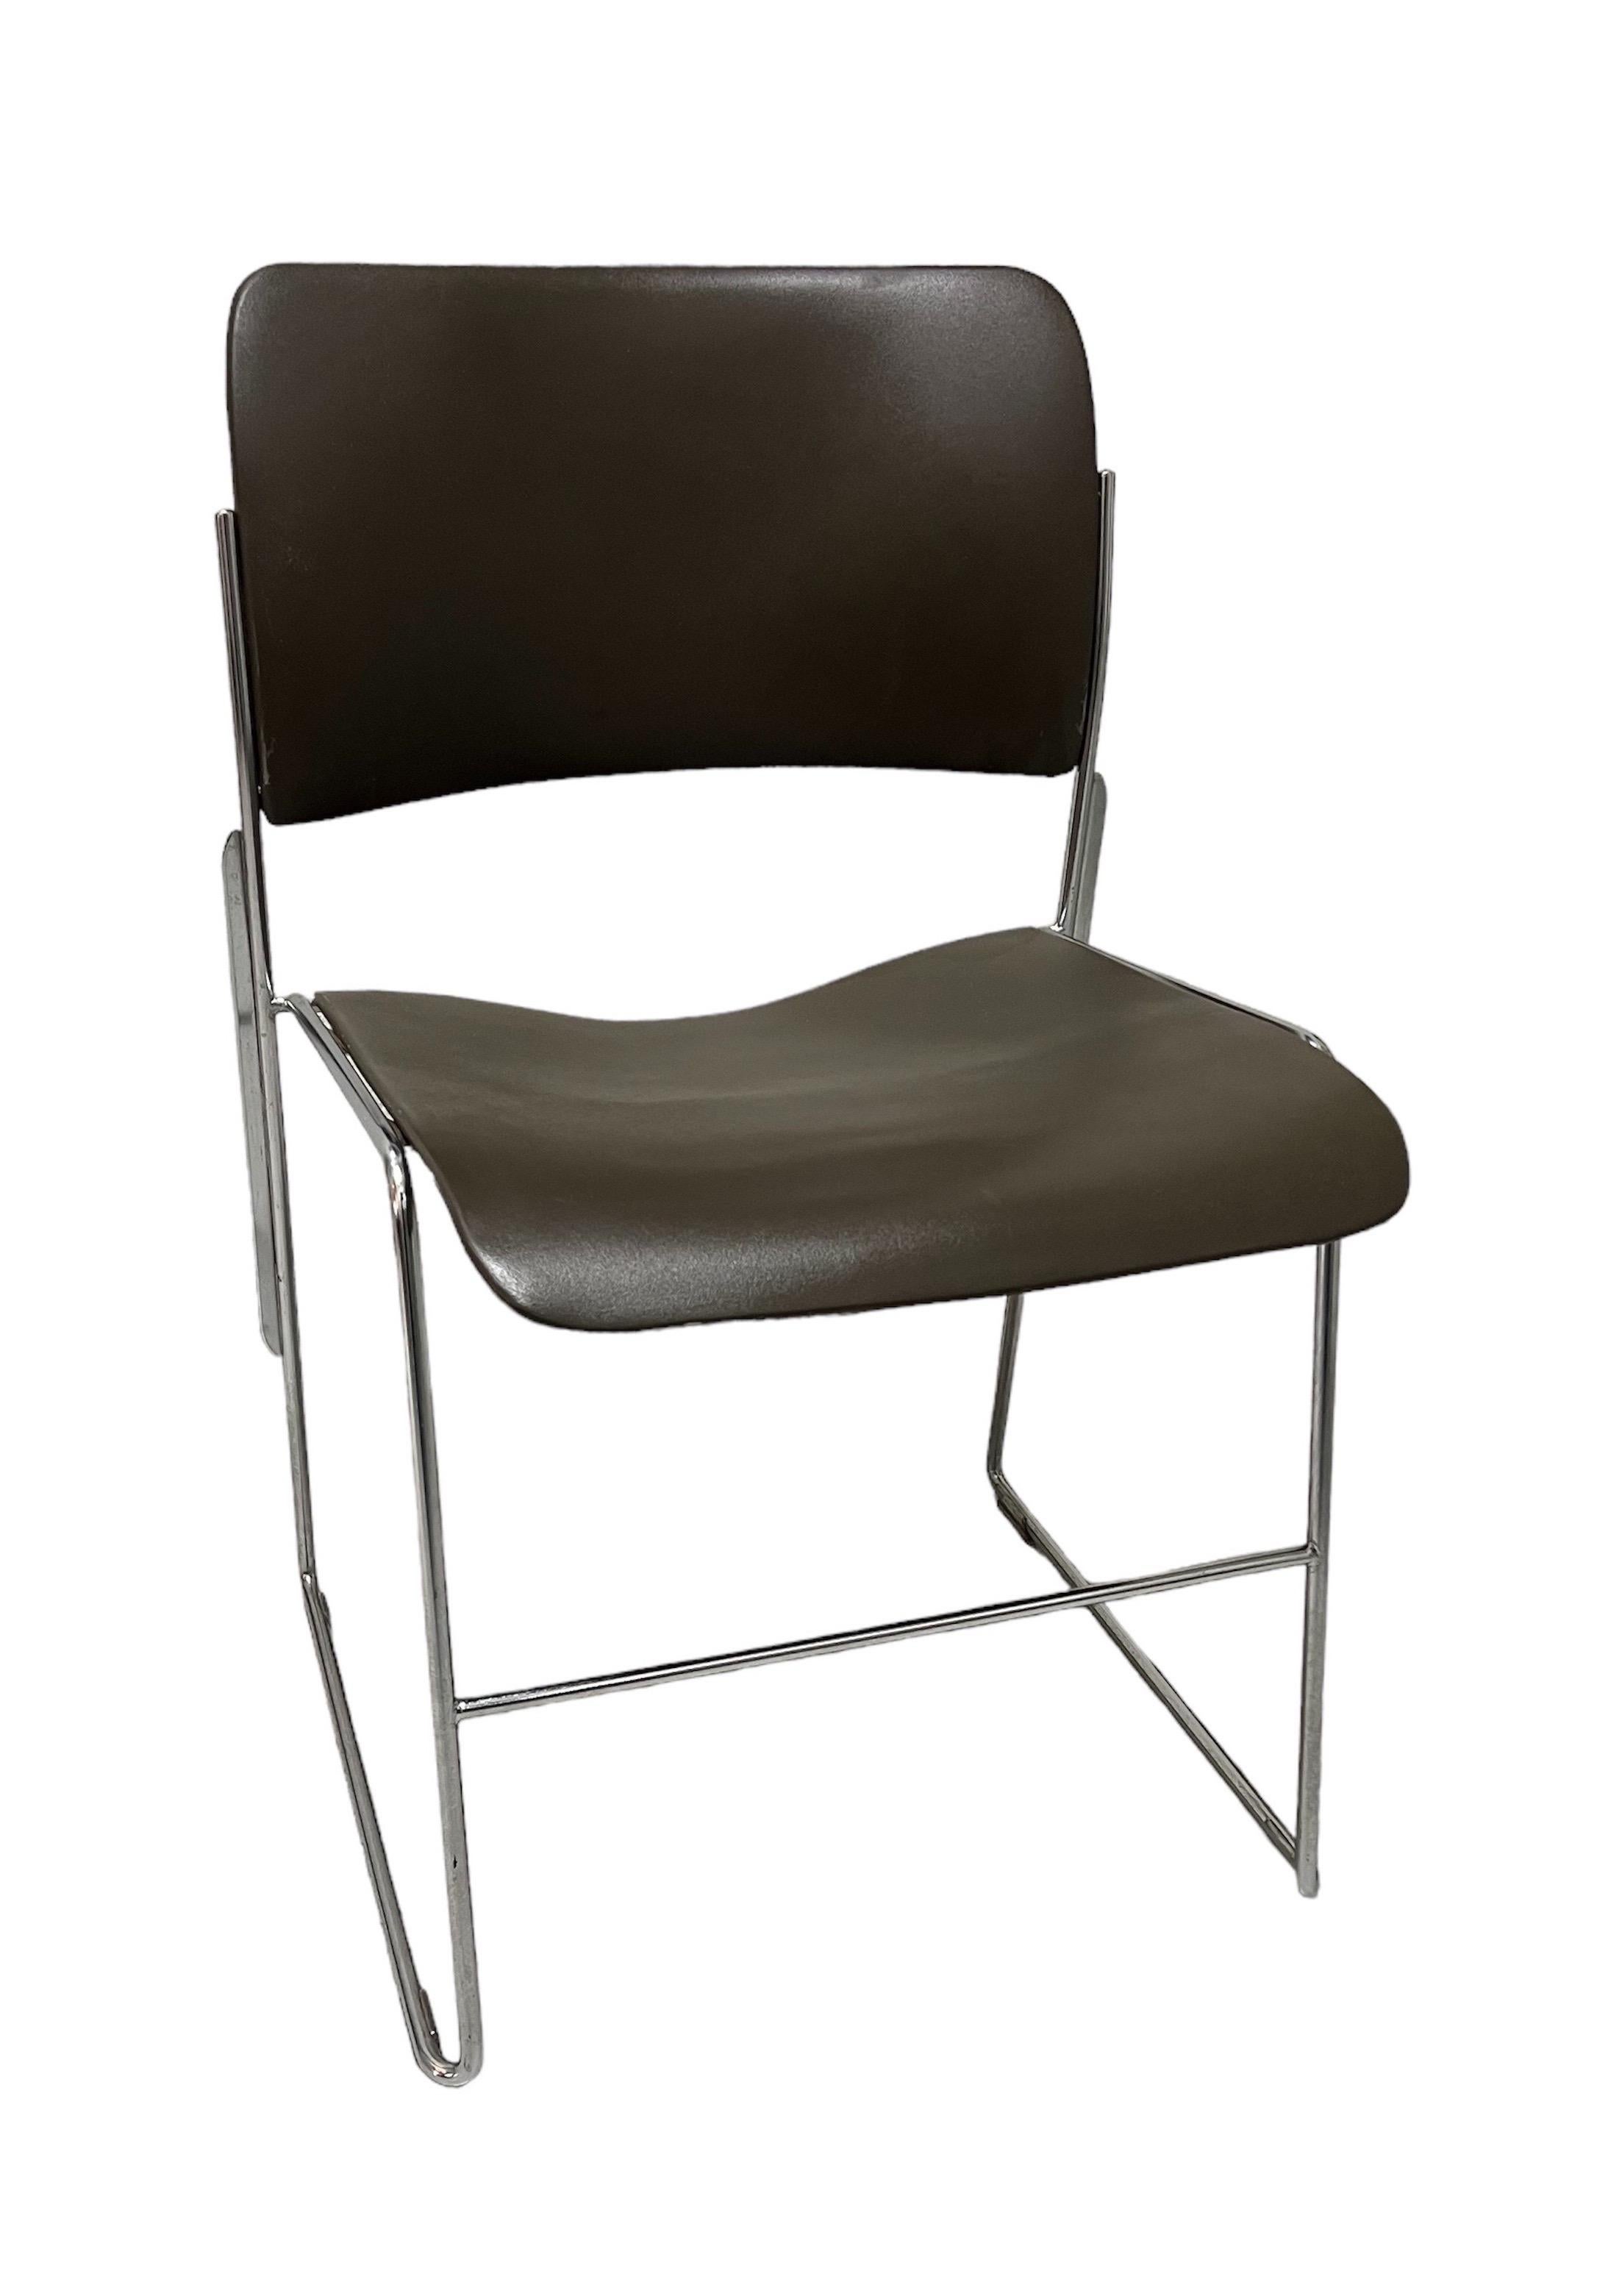 Polished Set of 4 Stackable 40/4 Chairs By David Rowland in Dark Brown For Sale